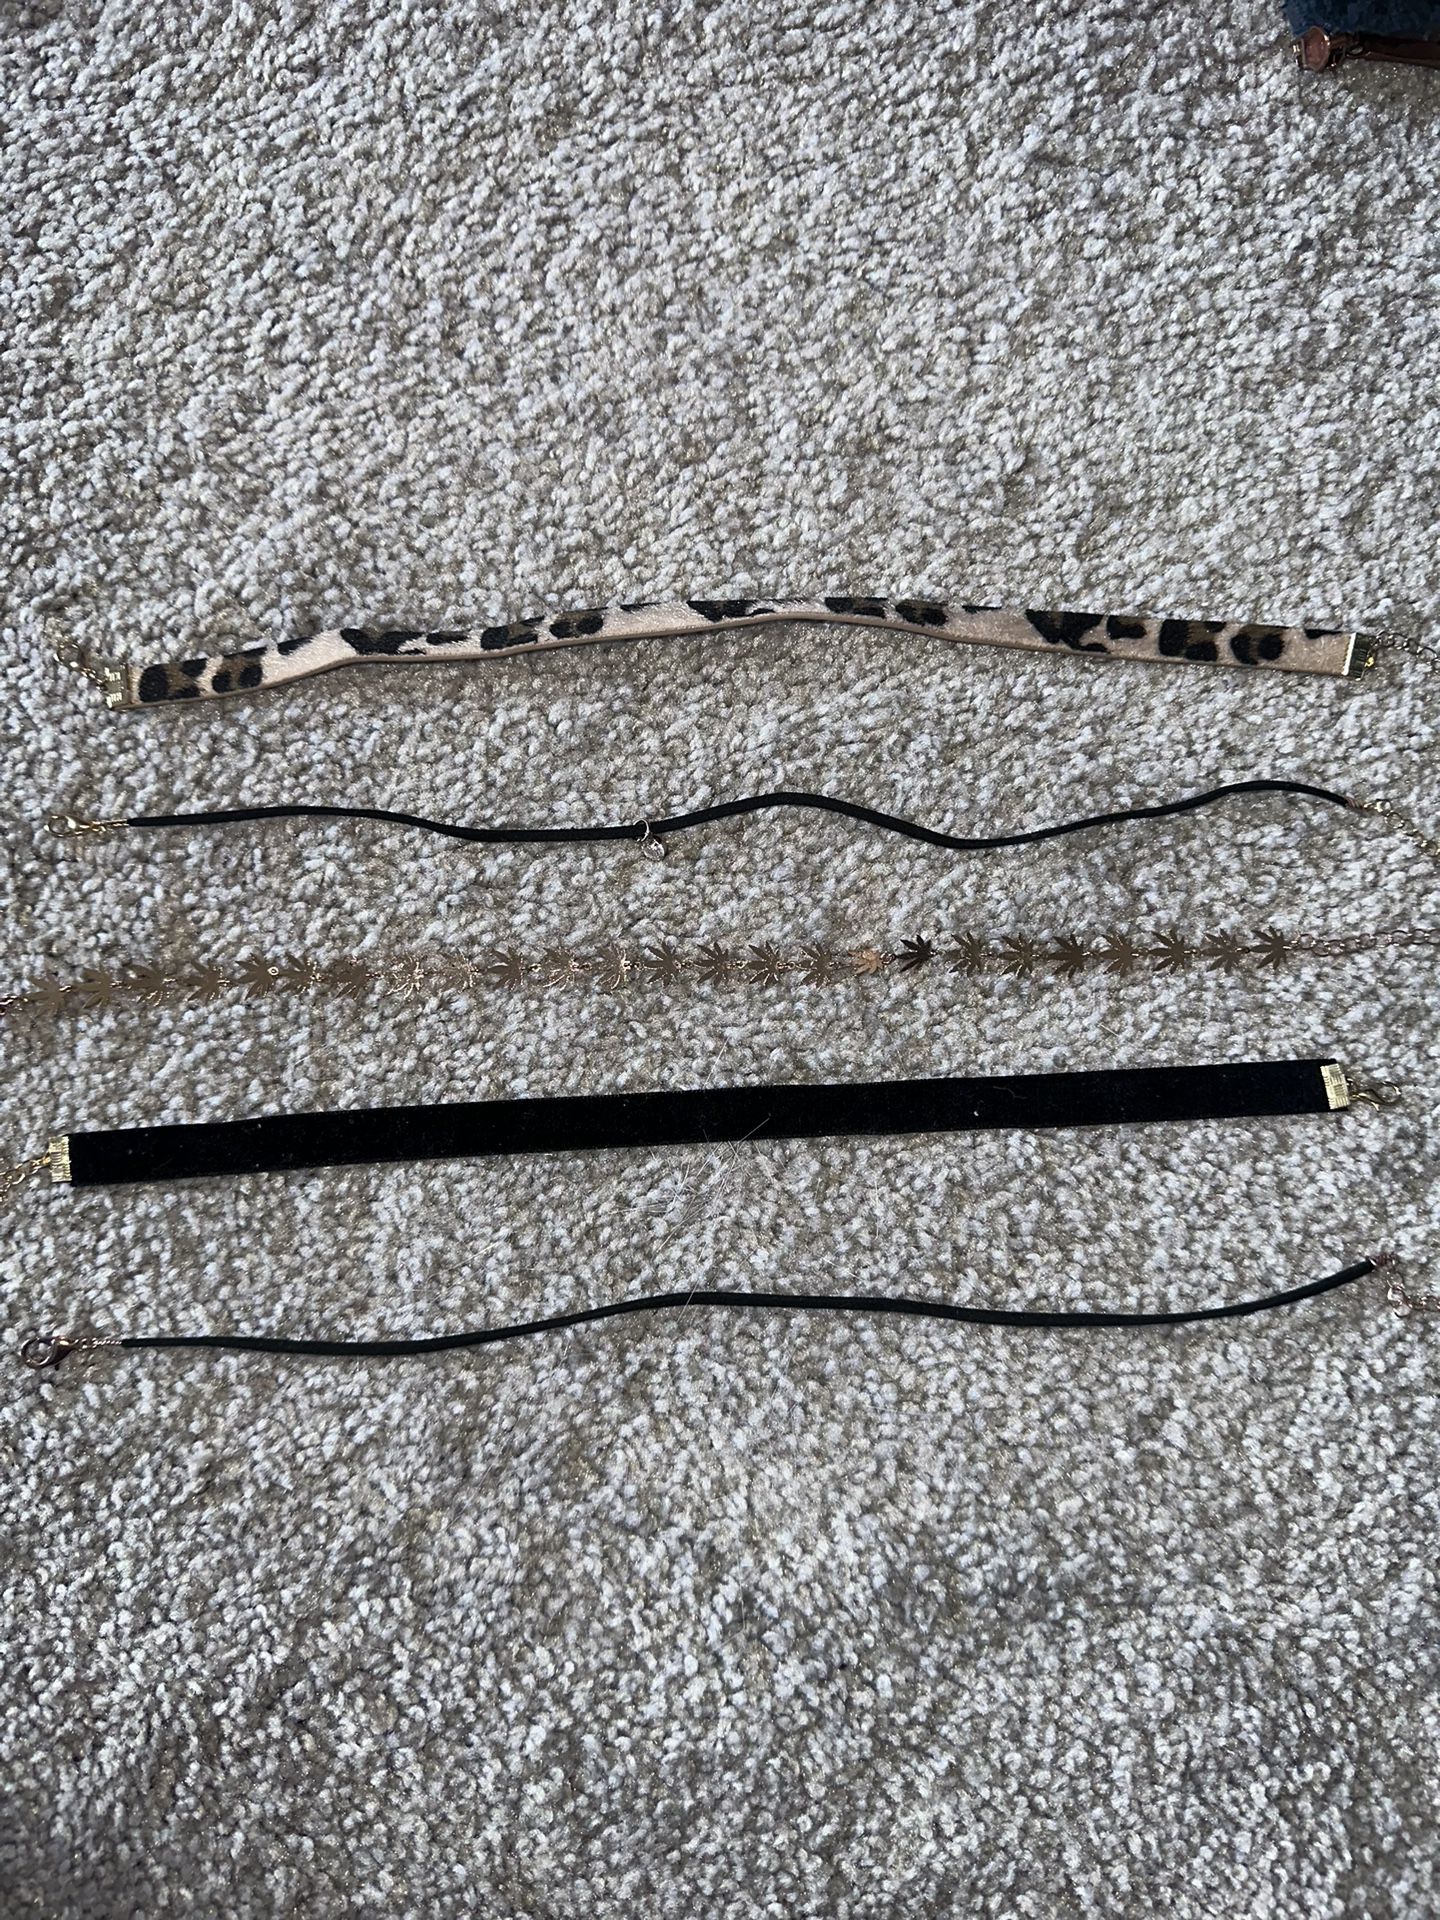 5 Pack Chokers Set For The Neck for 1$ 